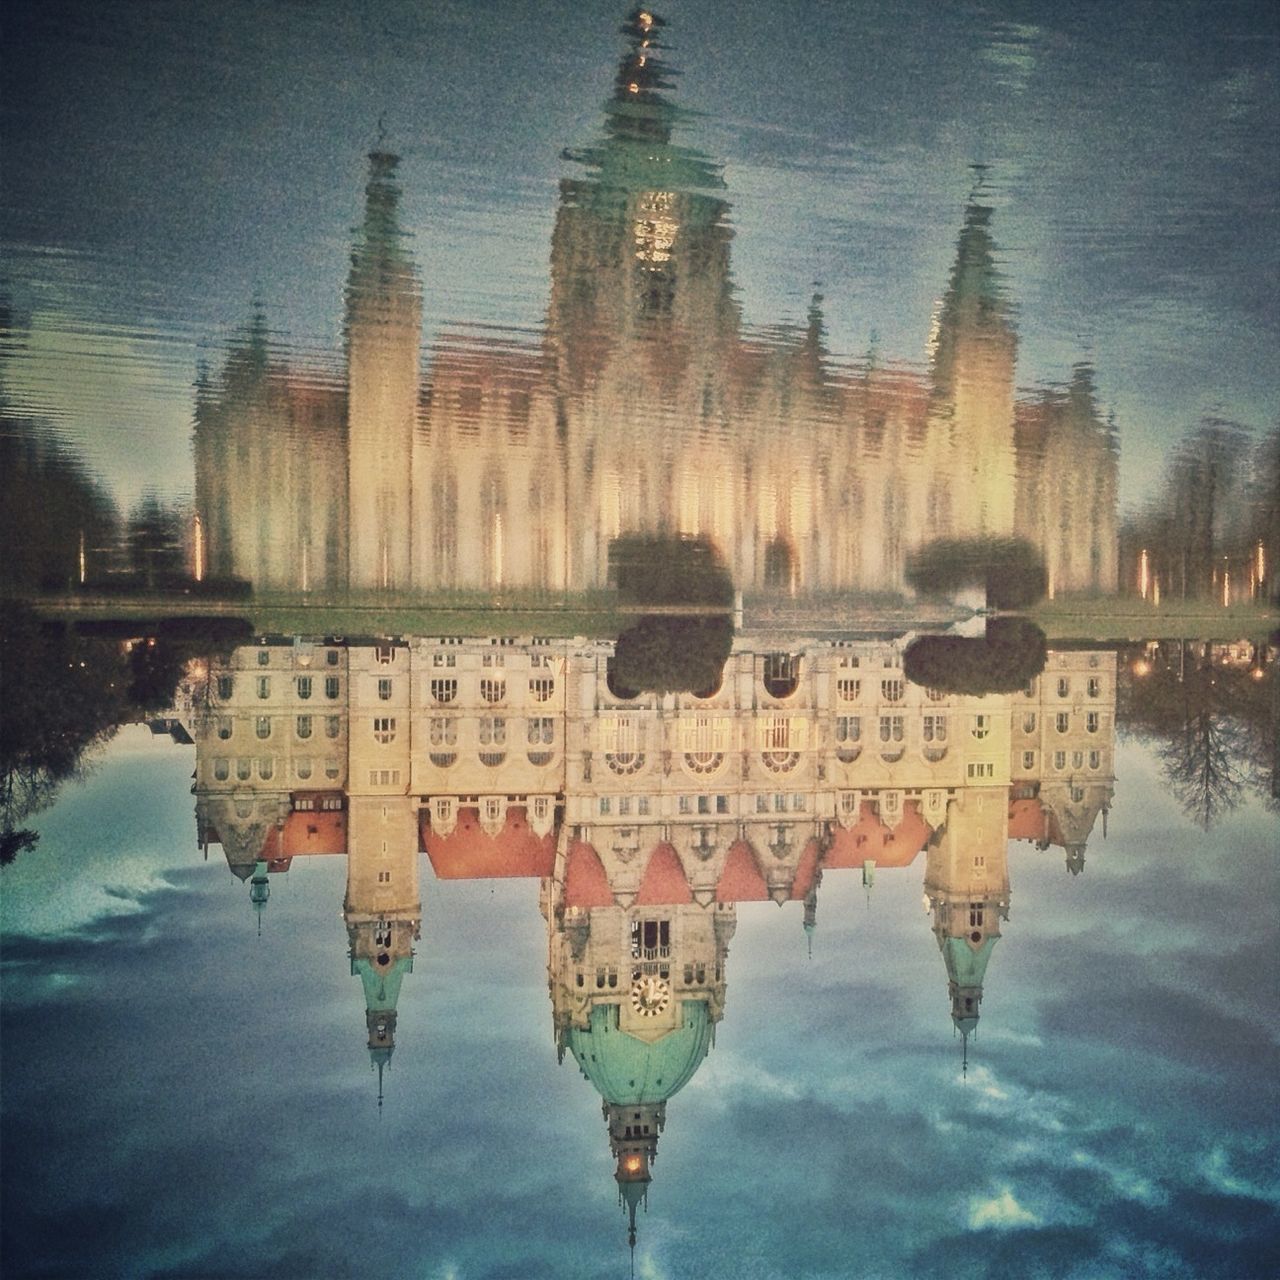 architecture, reflection, built structure, building exterior, water, sky, waterfront, place of worship, cloud - sky, religion, standing water, spirituality, travel destinations, dusk, famous place, lake, outdoors, travel, tourism, history